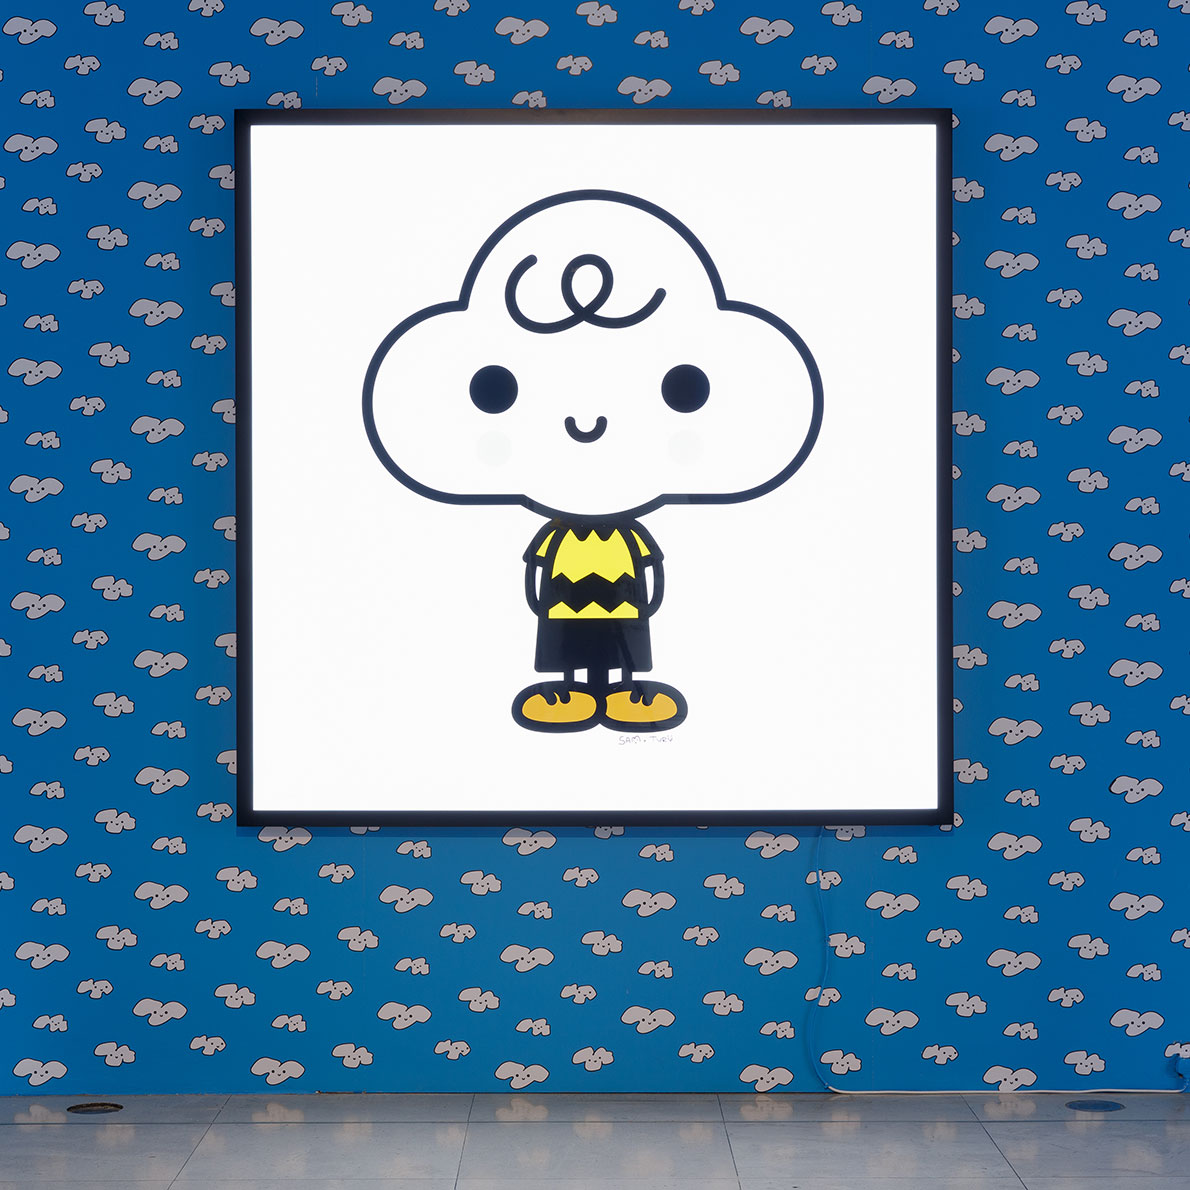 An illustration of a white cloud with a face hanging on a blue wall.